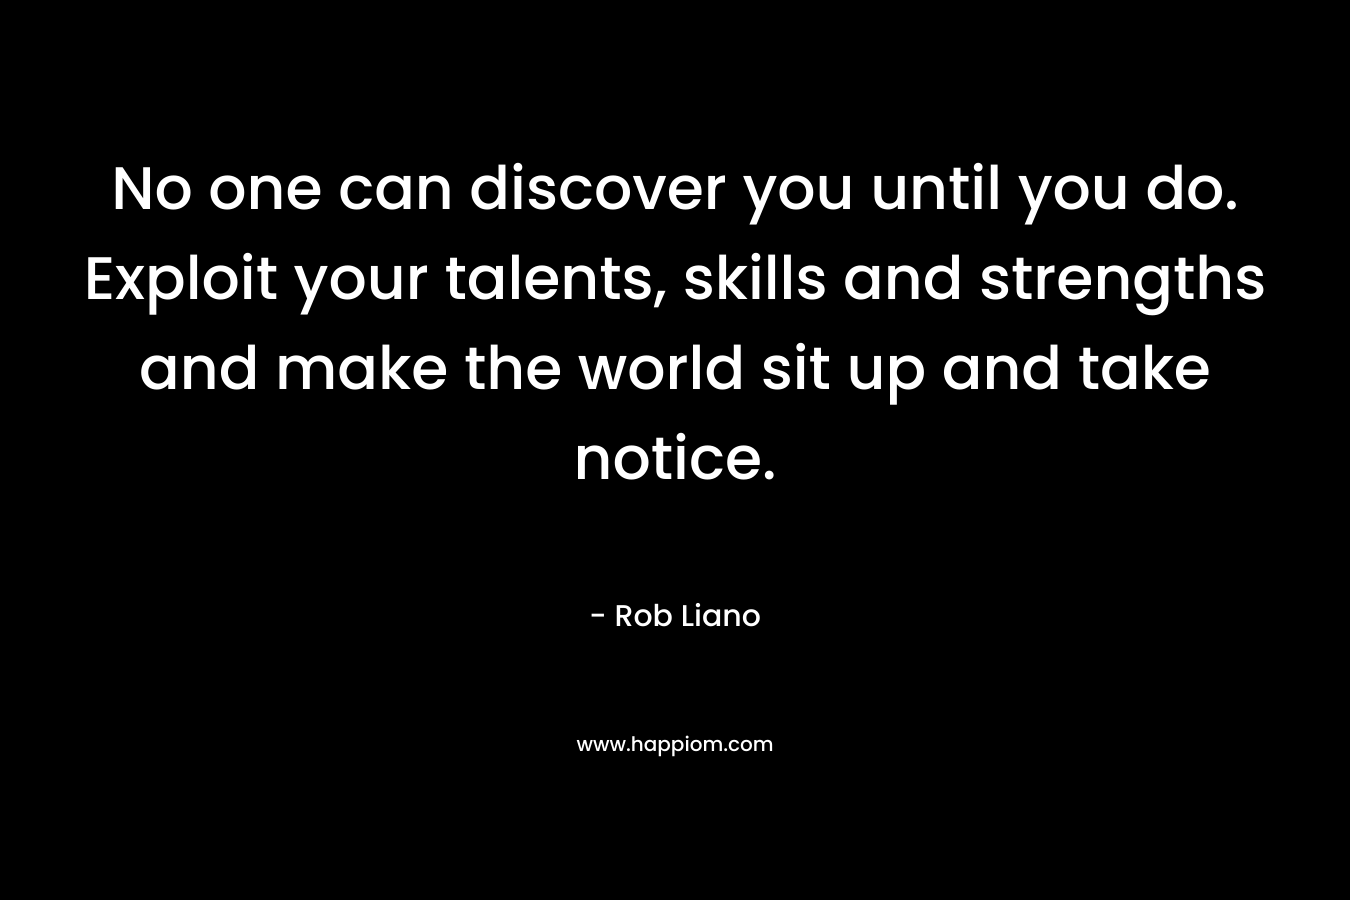 No one can discover you until you do. Exploit your talents, skills and strengths and make the world sit up and take notice.